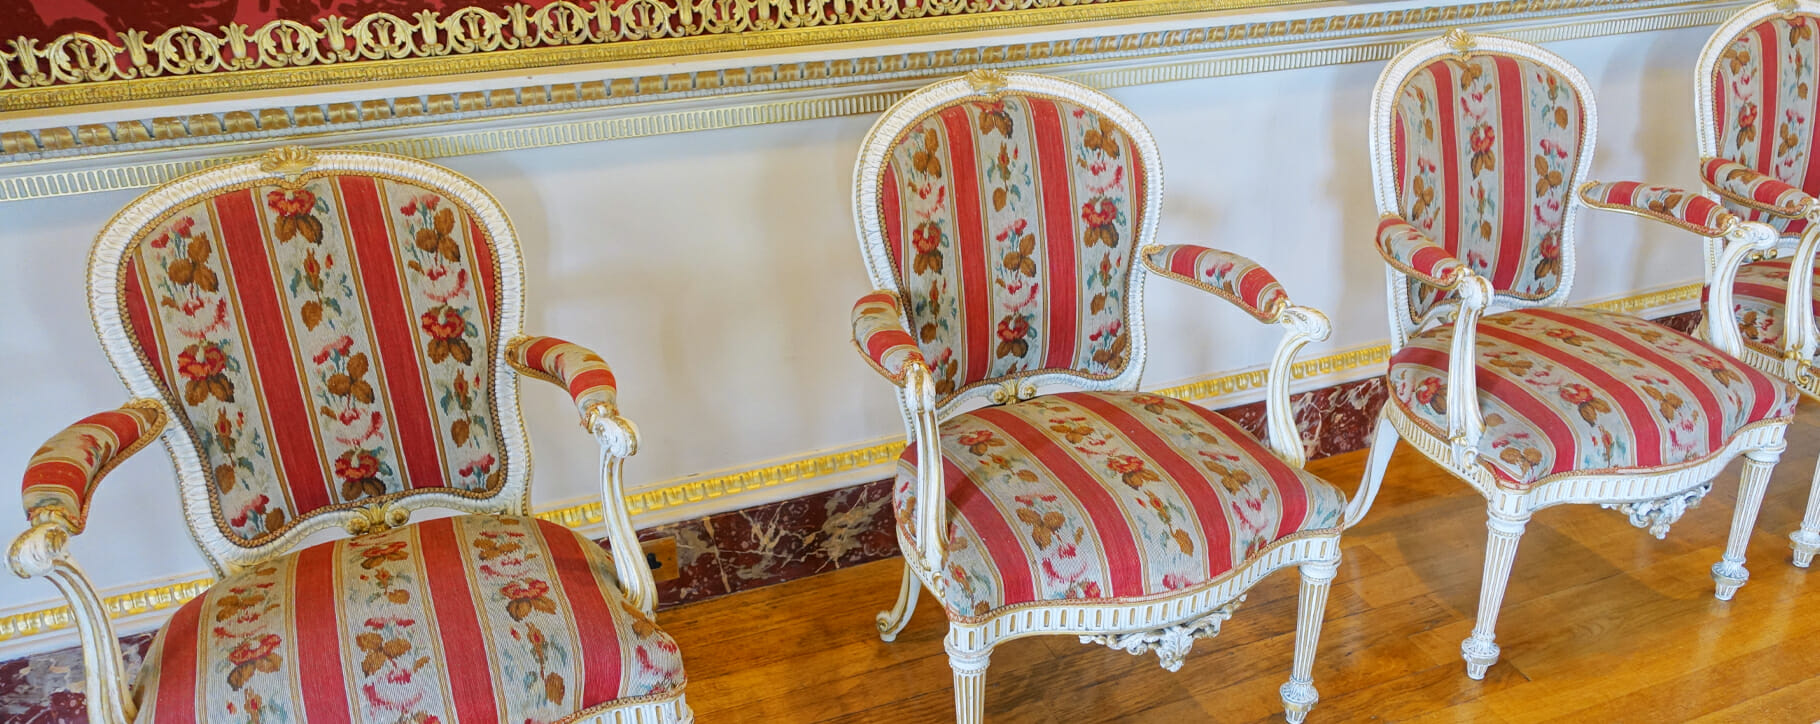 Harewood House Chippendale chairs